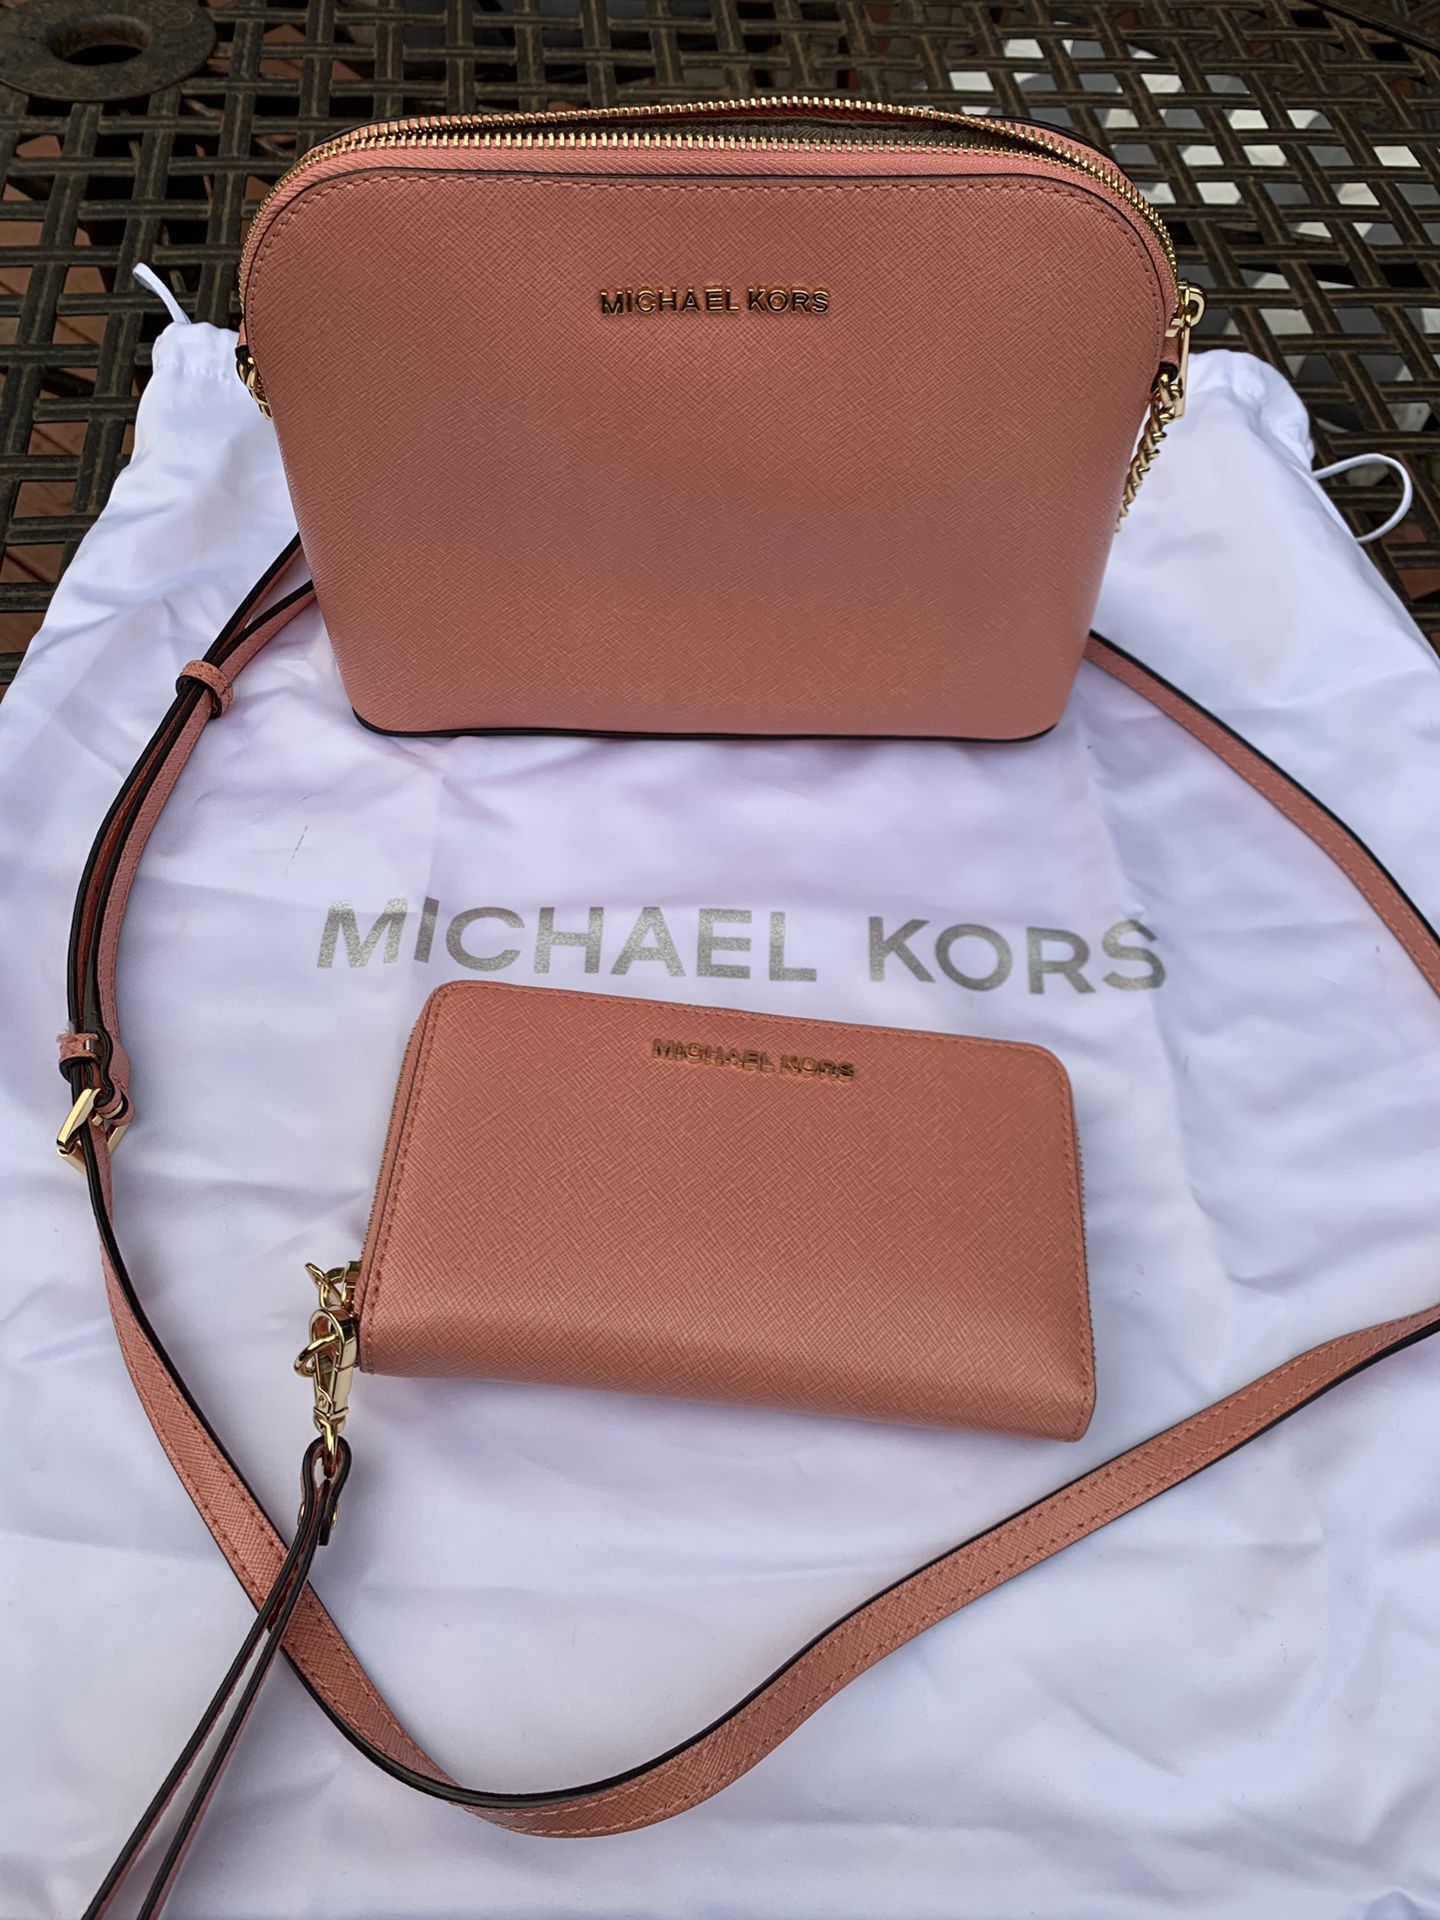 MICHAEL KORS purse and wallet